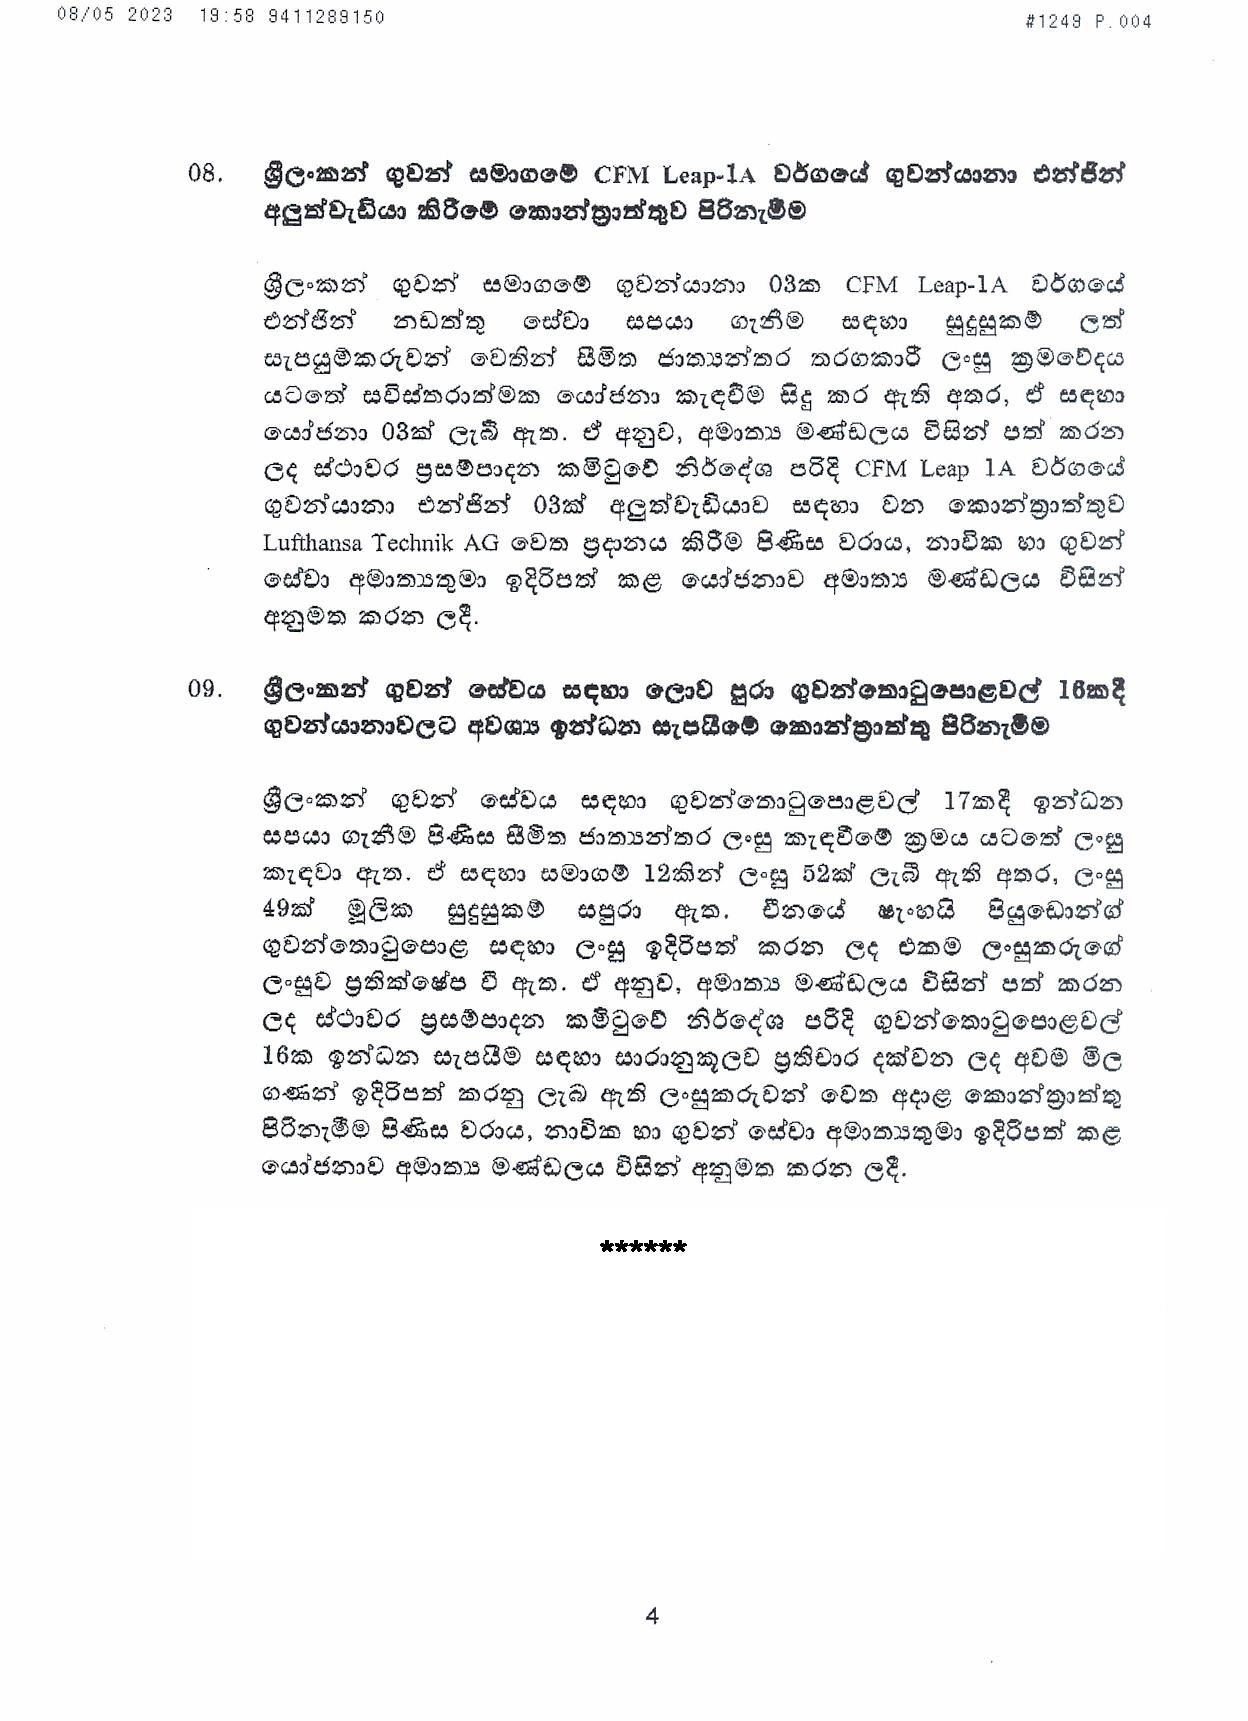 Cabinet Decisions on 08.05.2023 page 004